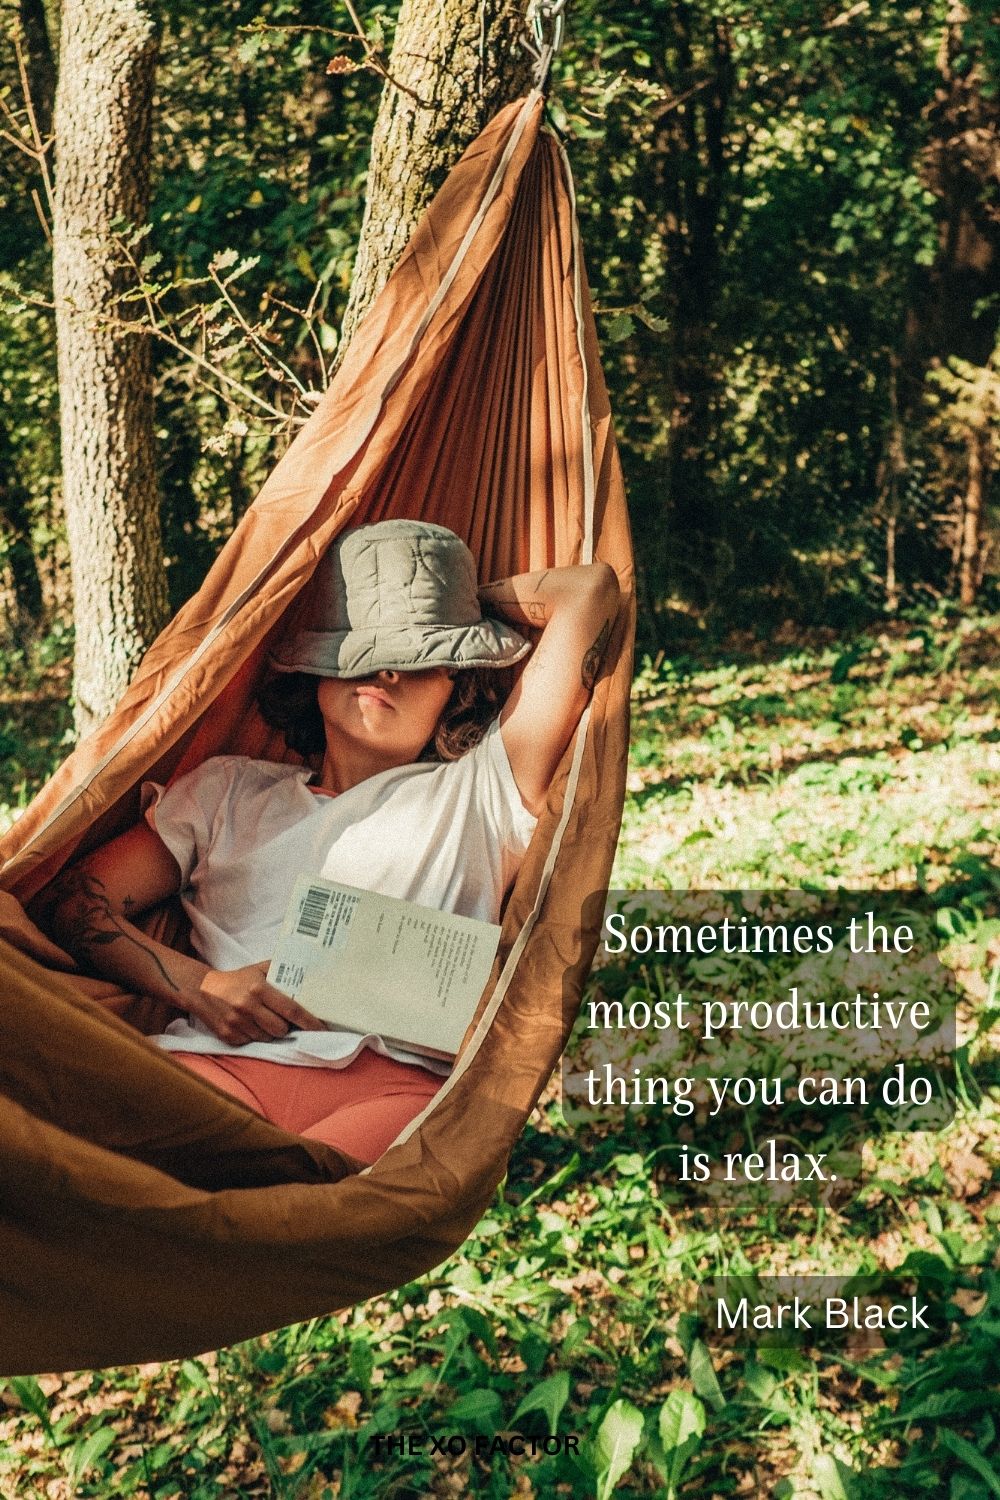 Sometimes the most productive thing you can do is relax.
Mark Black